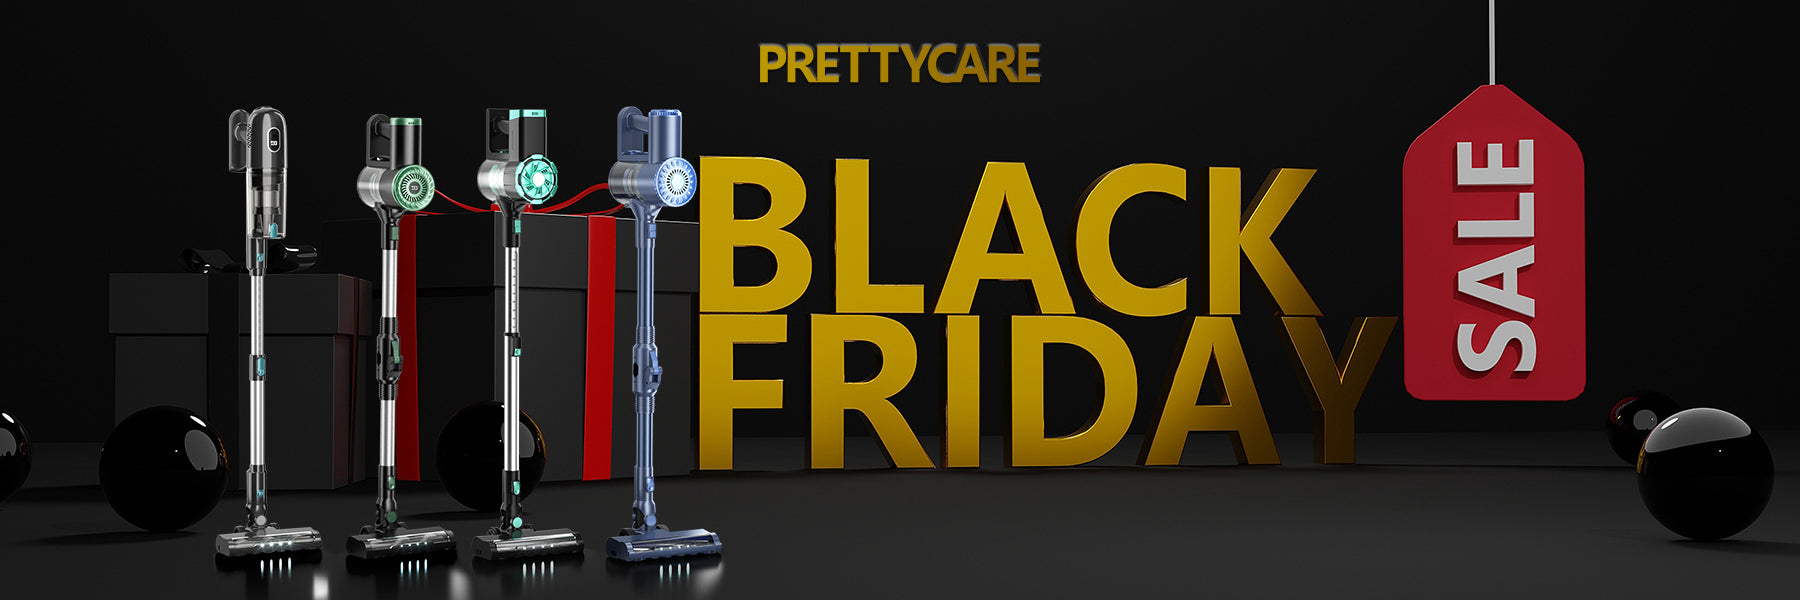 Don't Miss Out: PRETTYCARE Black Friday Deals End Today!